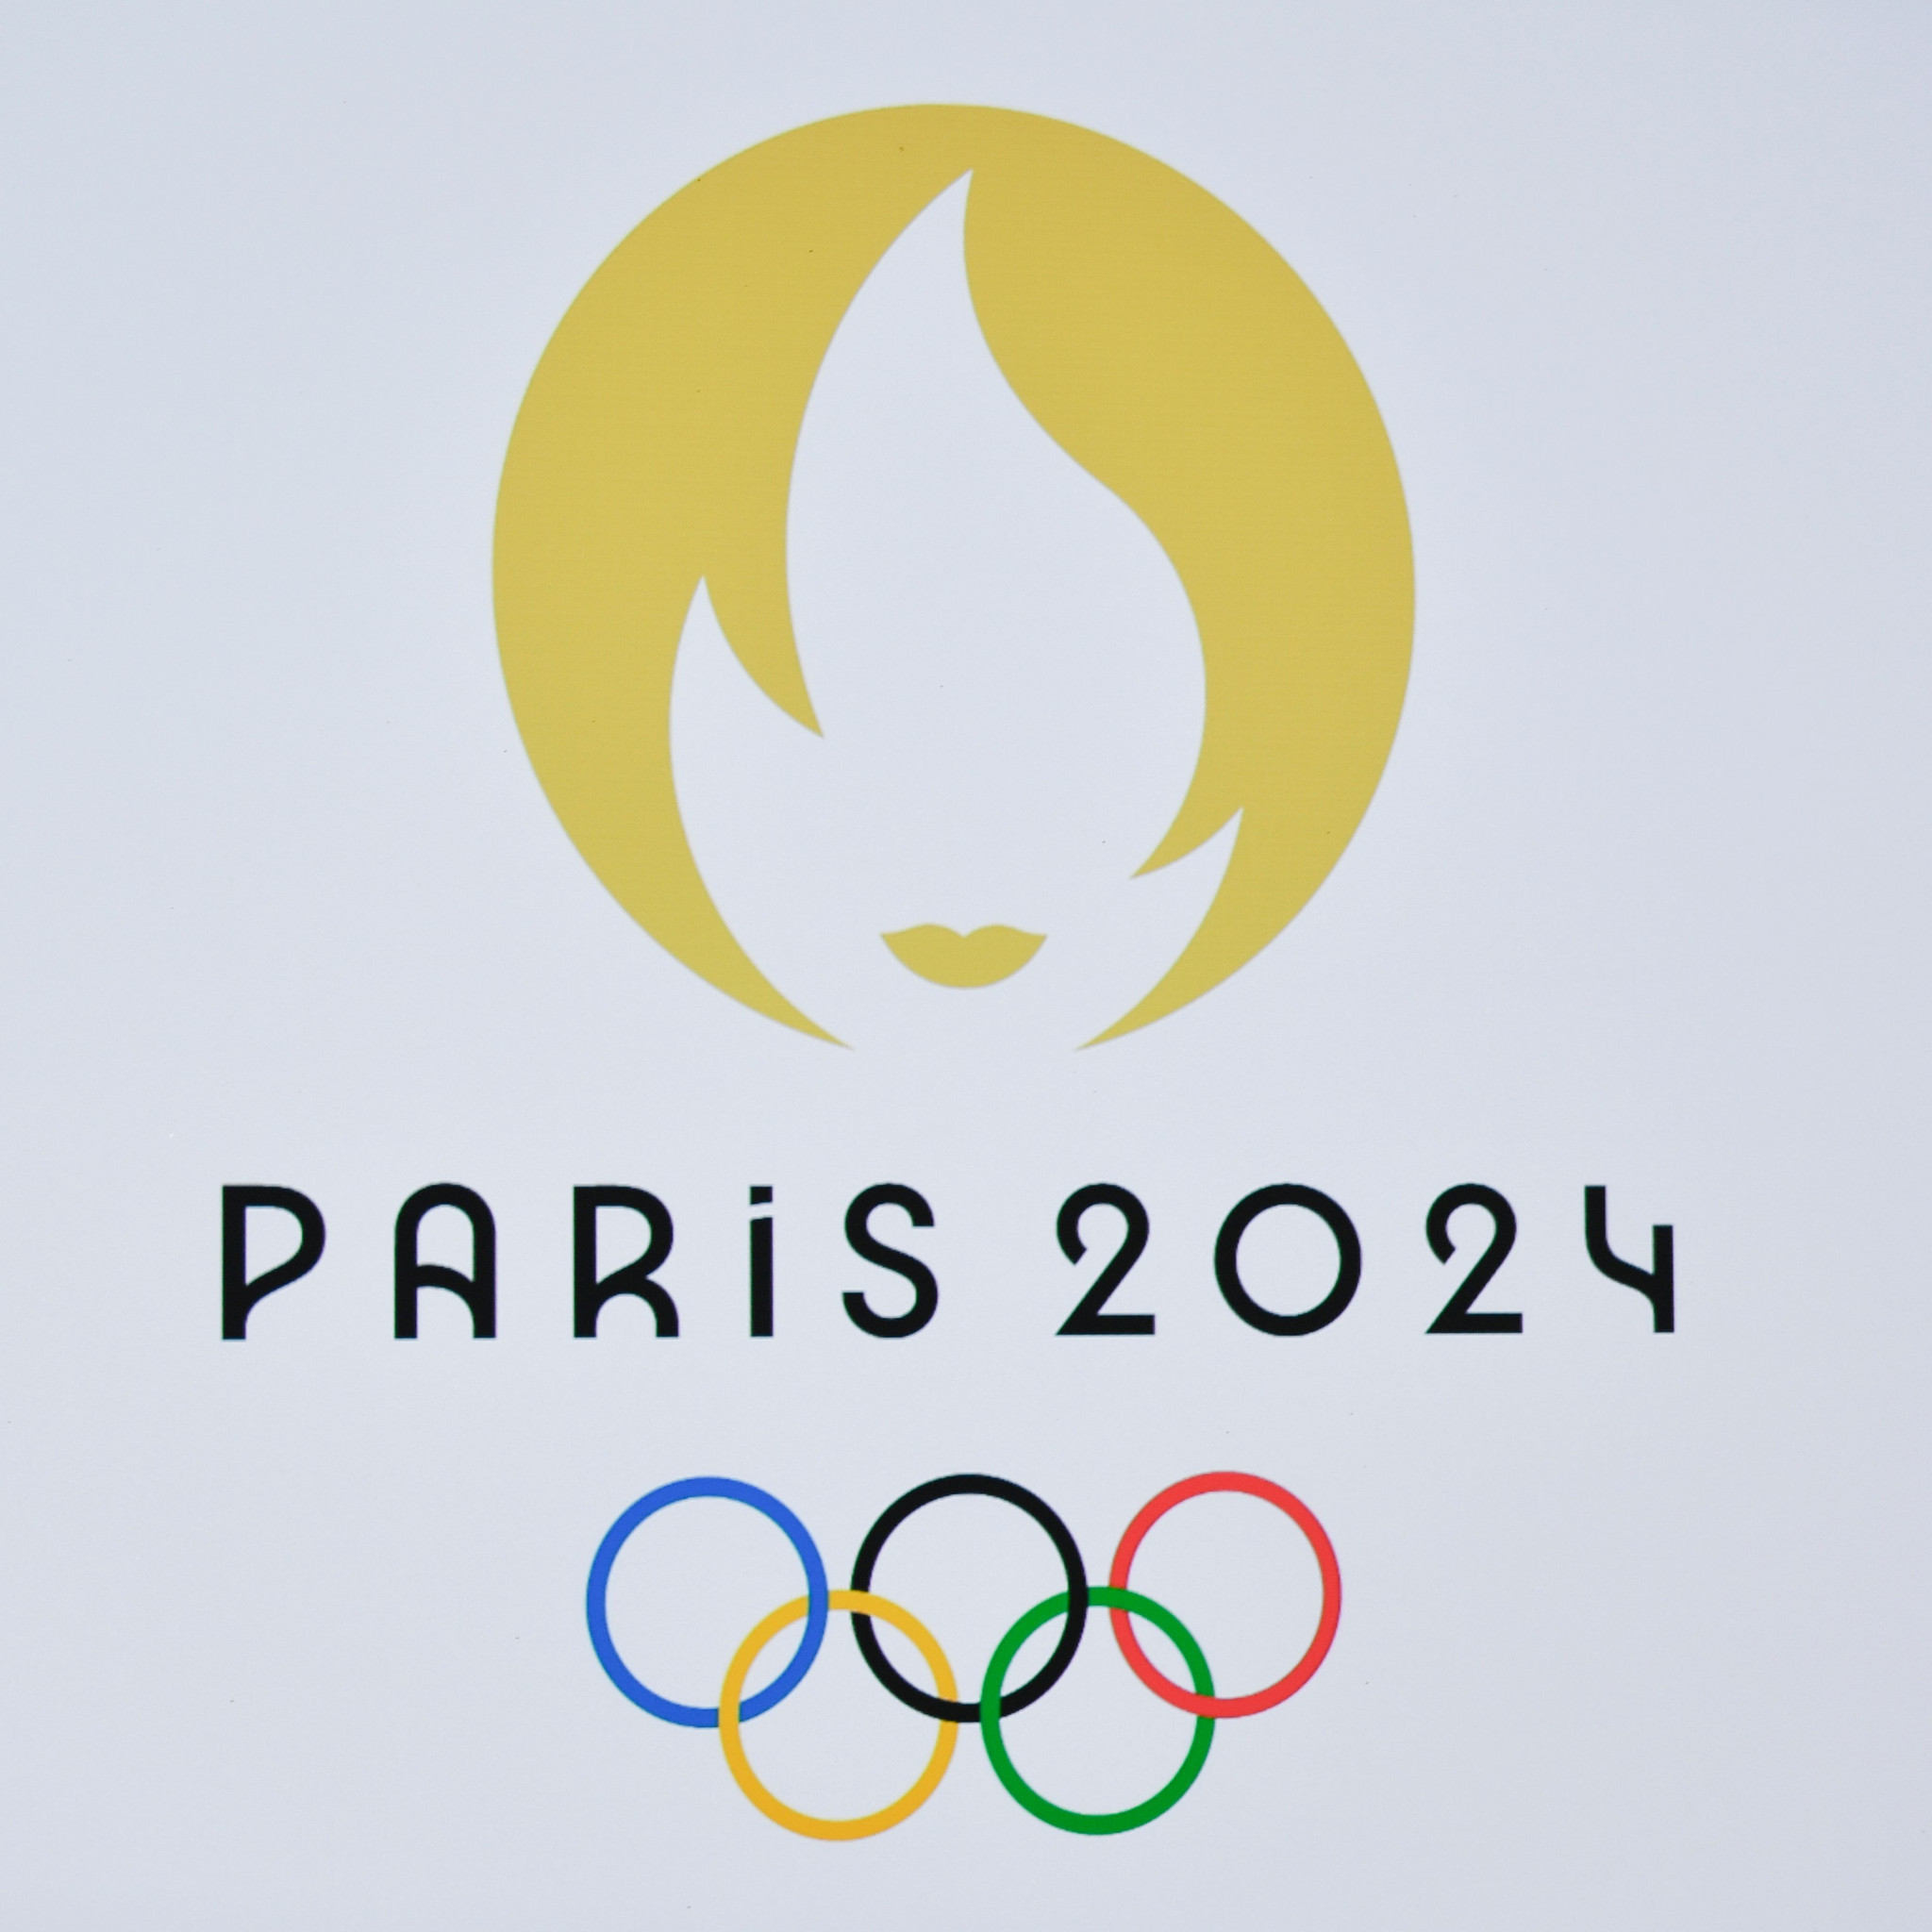 Paris 2024 seeking to reduce competition sites to aid budget